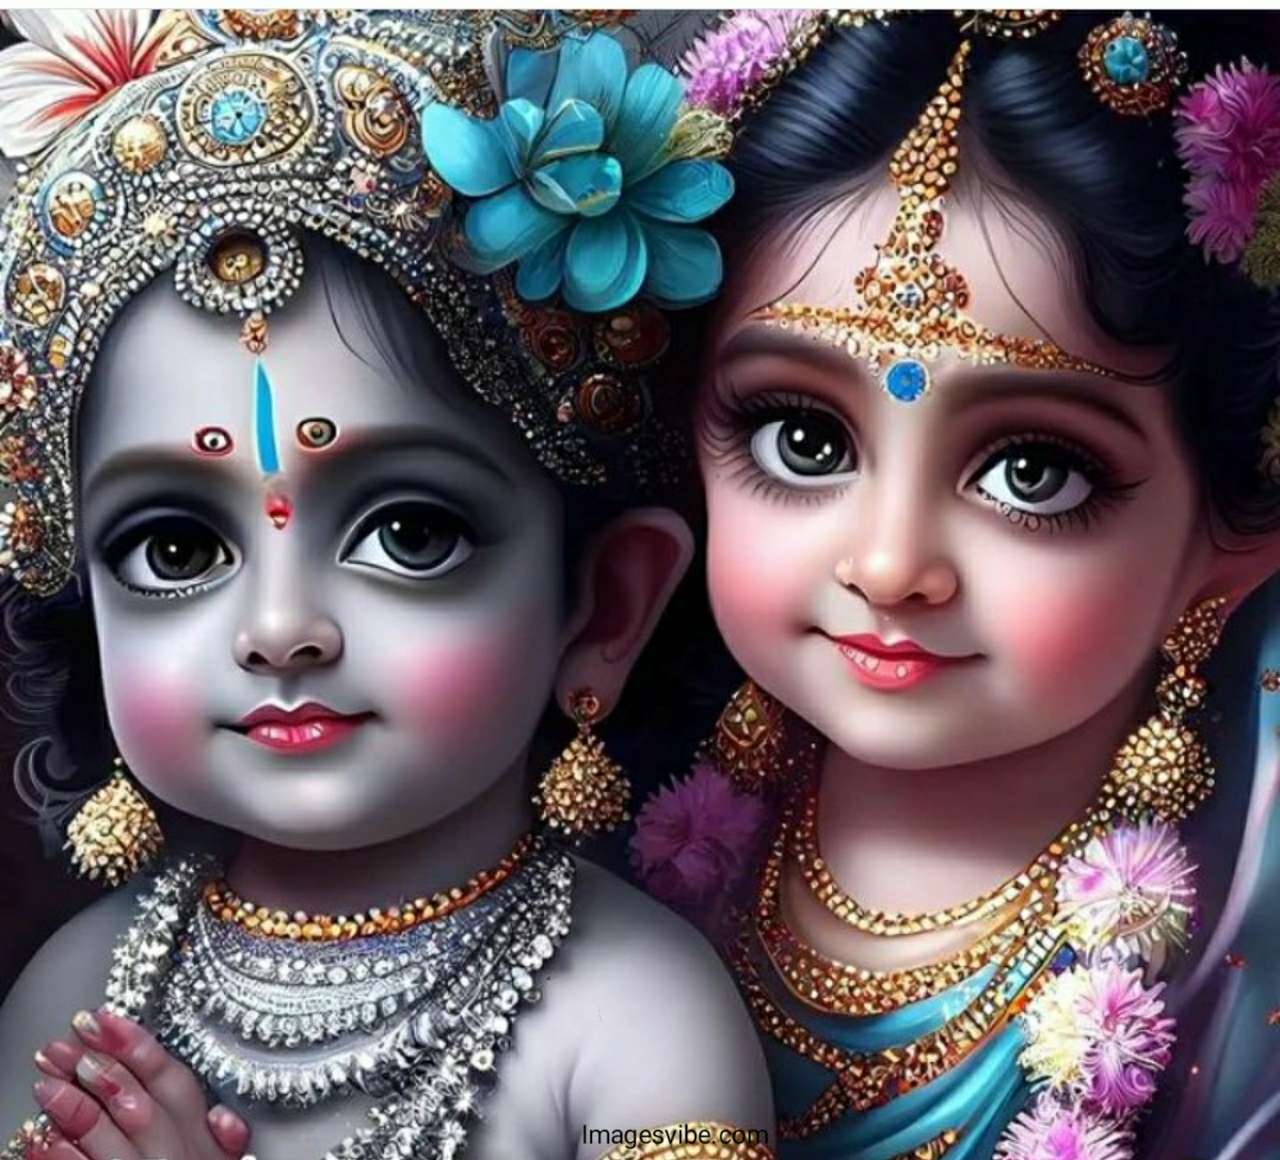 Download Over 999 Radha Krishna Images: A Stunning Collection of Full 4K Radha Krishna Images for Download